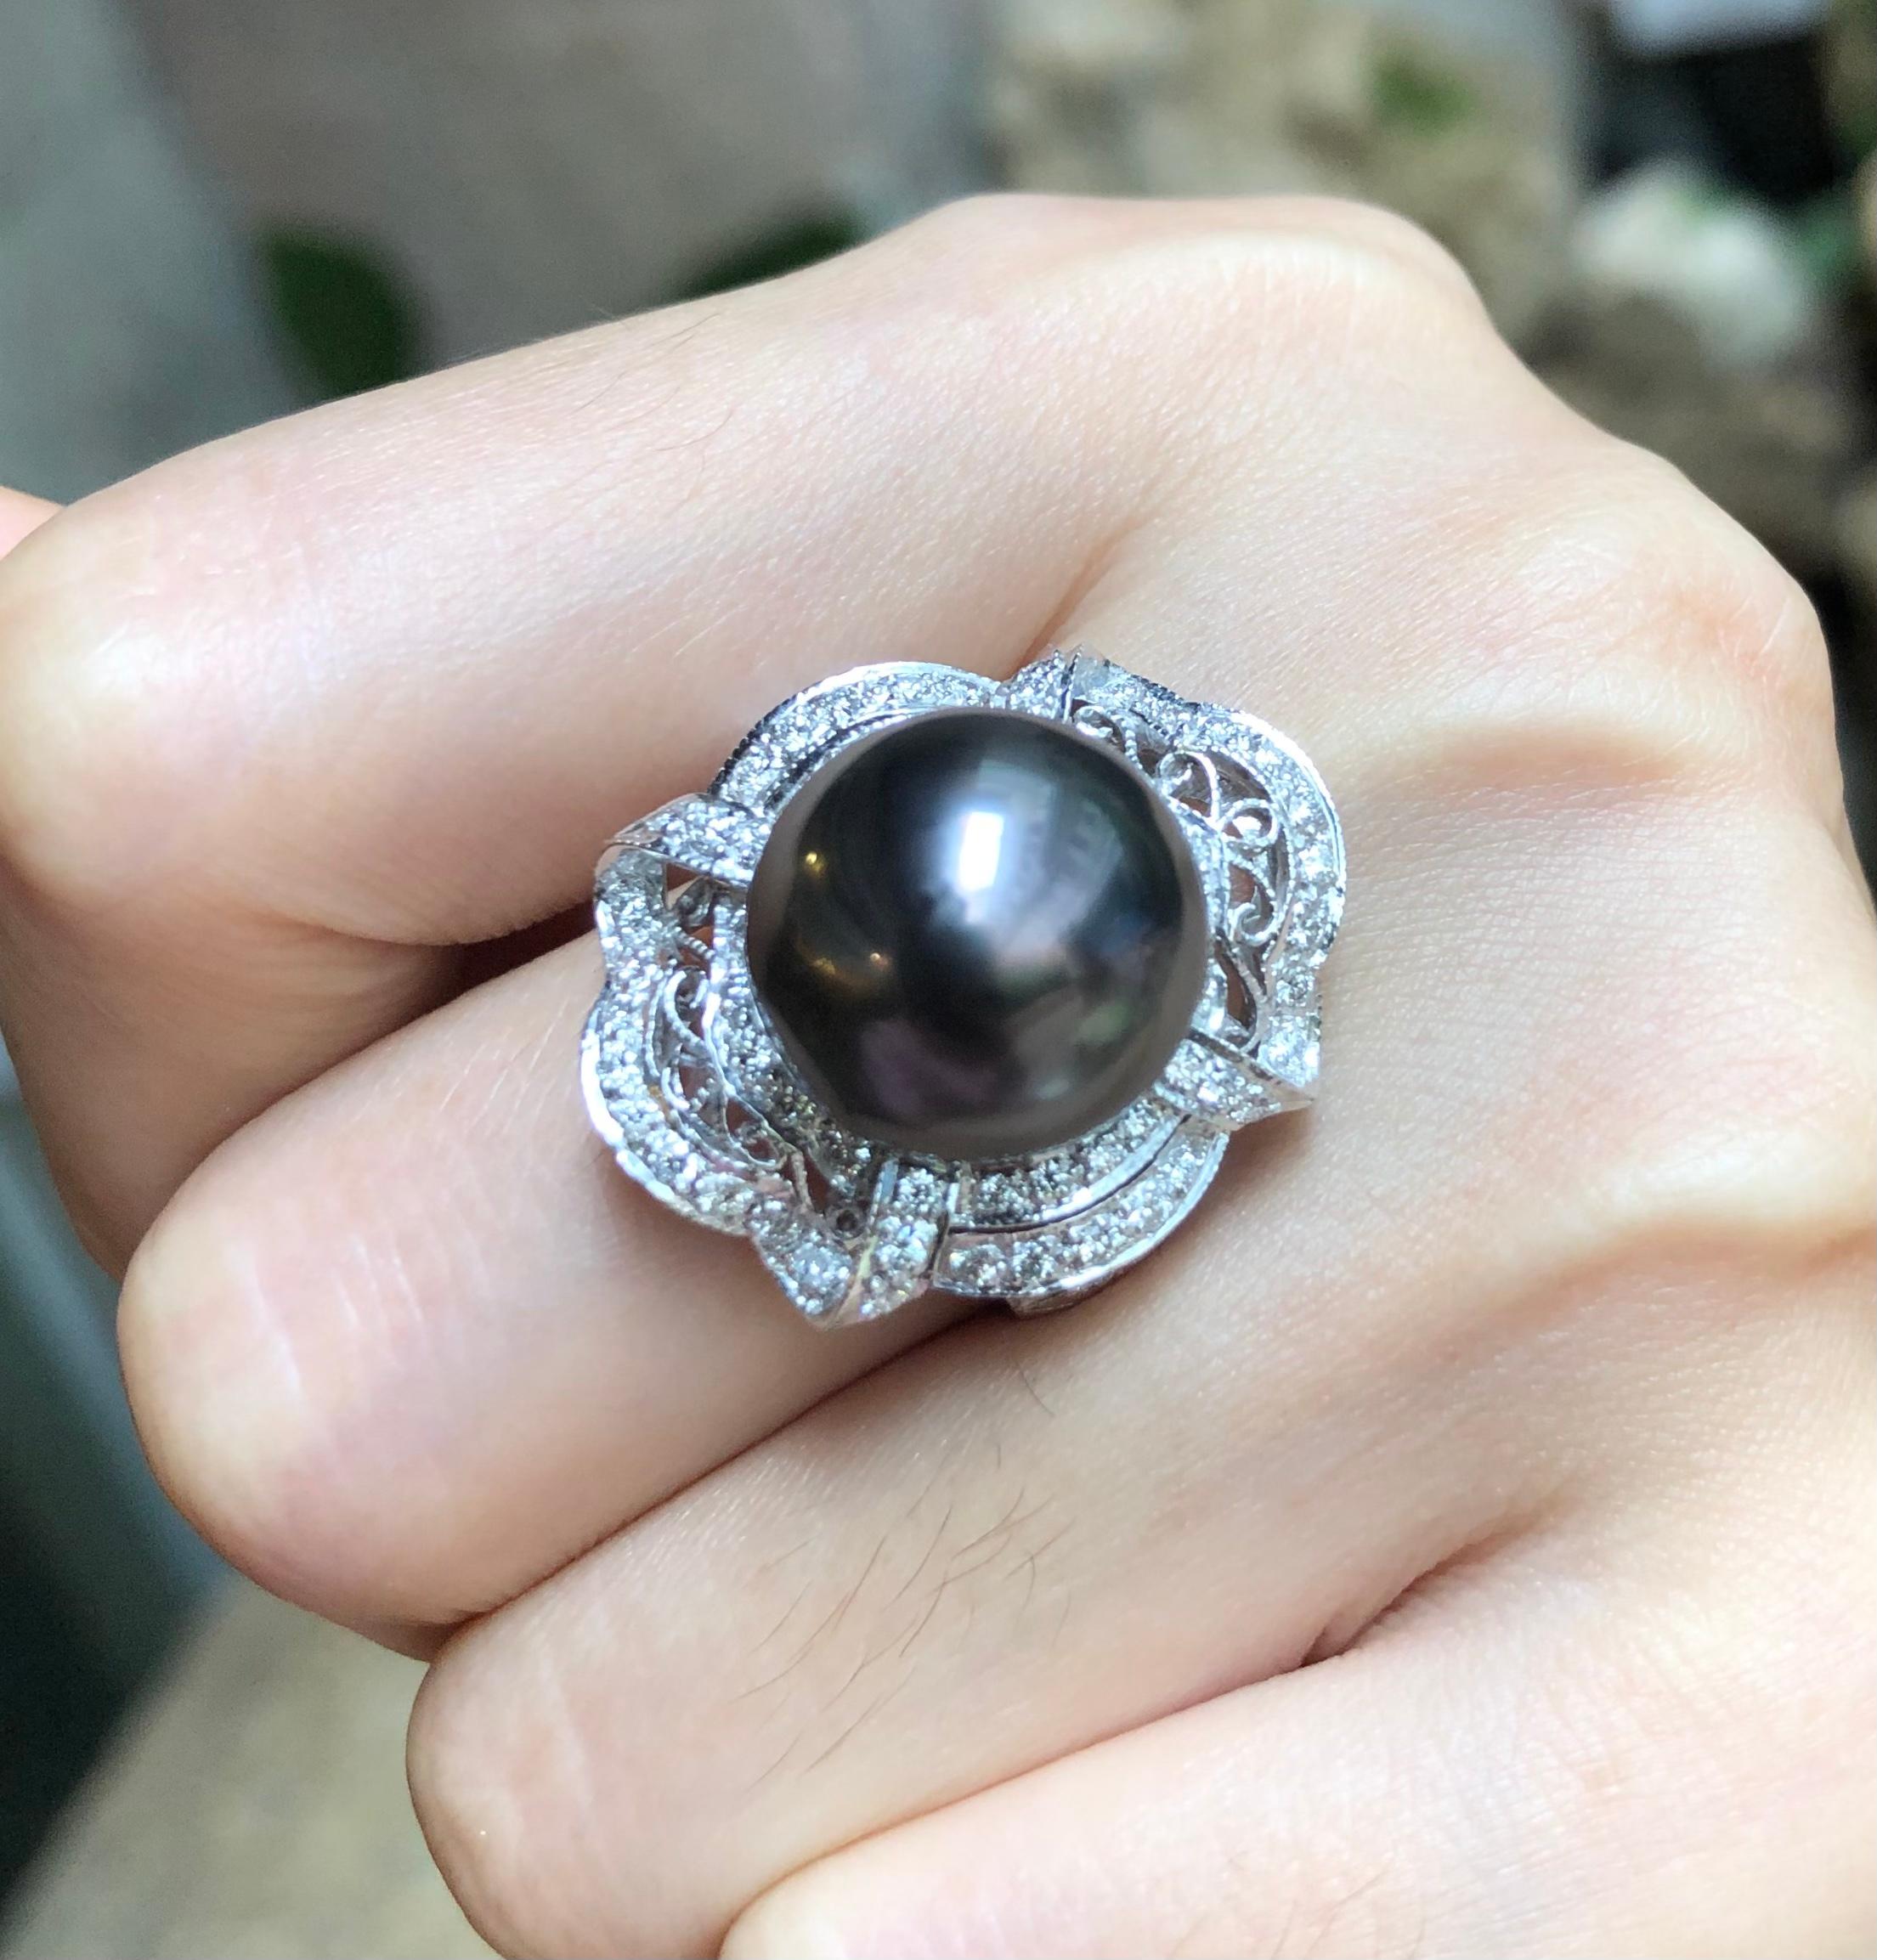 South Sea Pearl with Diamond 0.80 carat Ring set in 18 Karat White Gold Settings

Width:  2.3 cm 
Length: 2.5 cm
Ring Size: 55
Total Weight: 11.47 grams

